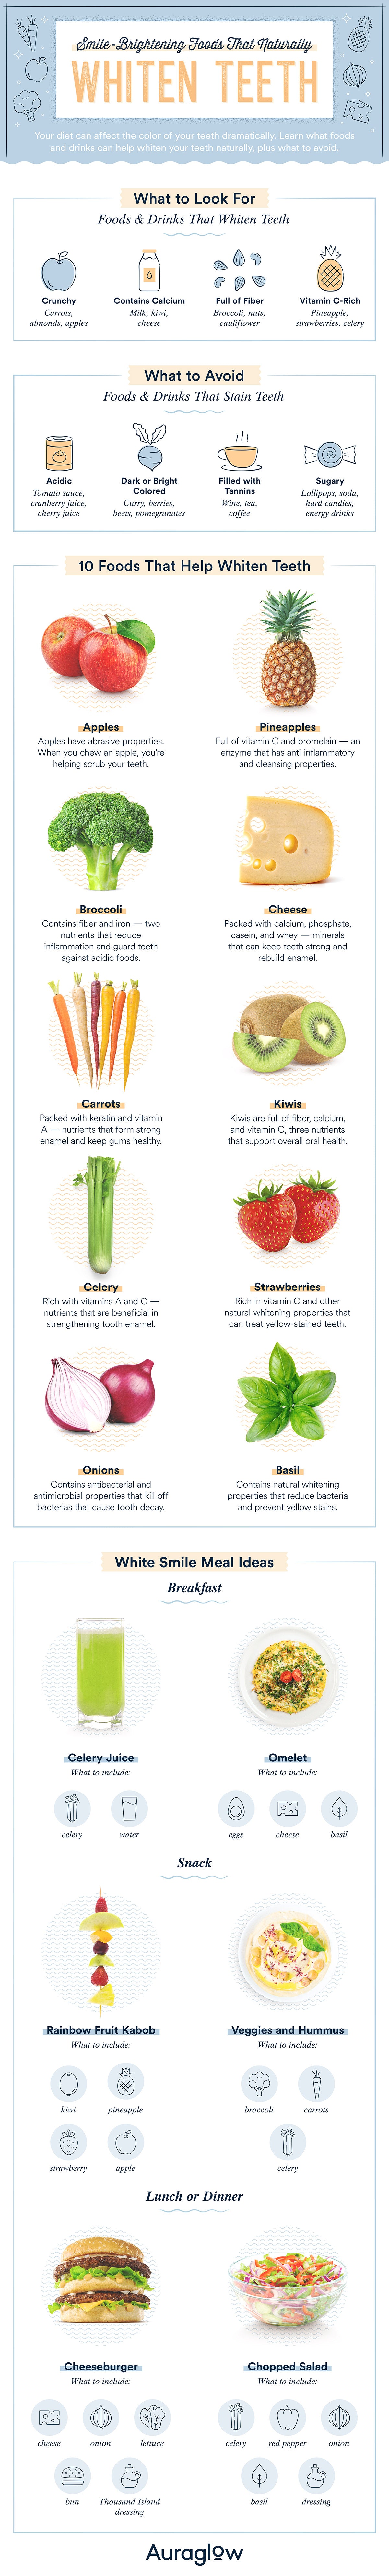 foods that whiten teeth infographic 